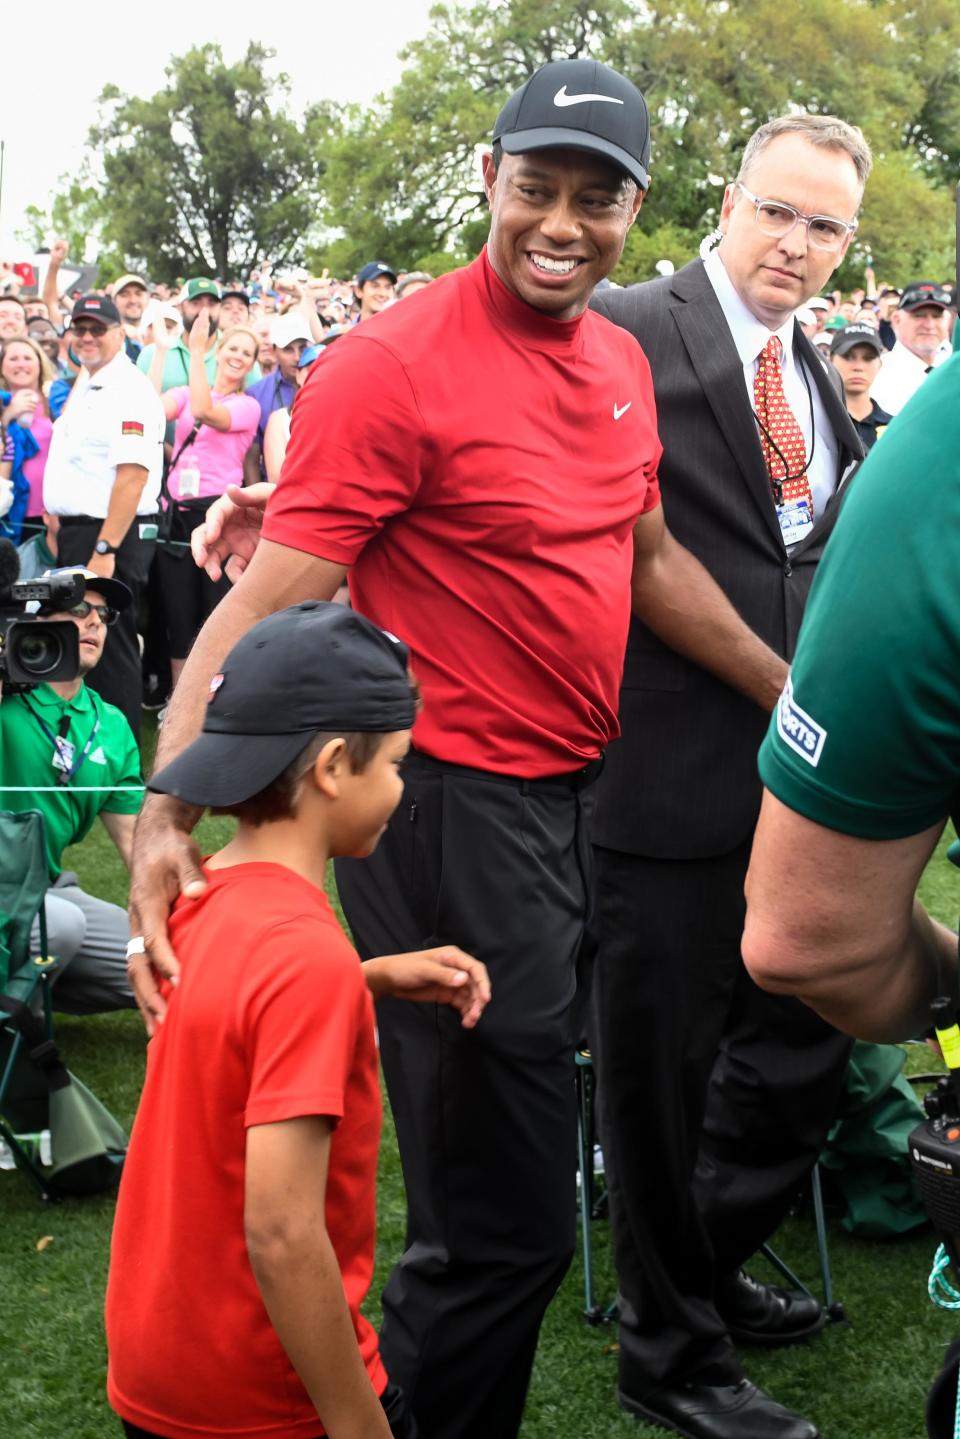 Tiger Woods celebrates with his son, Charlie, after winning the 2019 Masters.